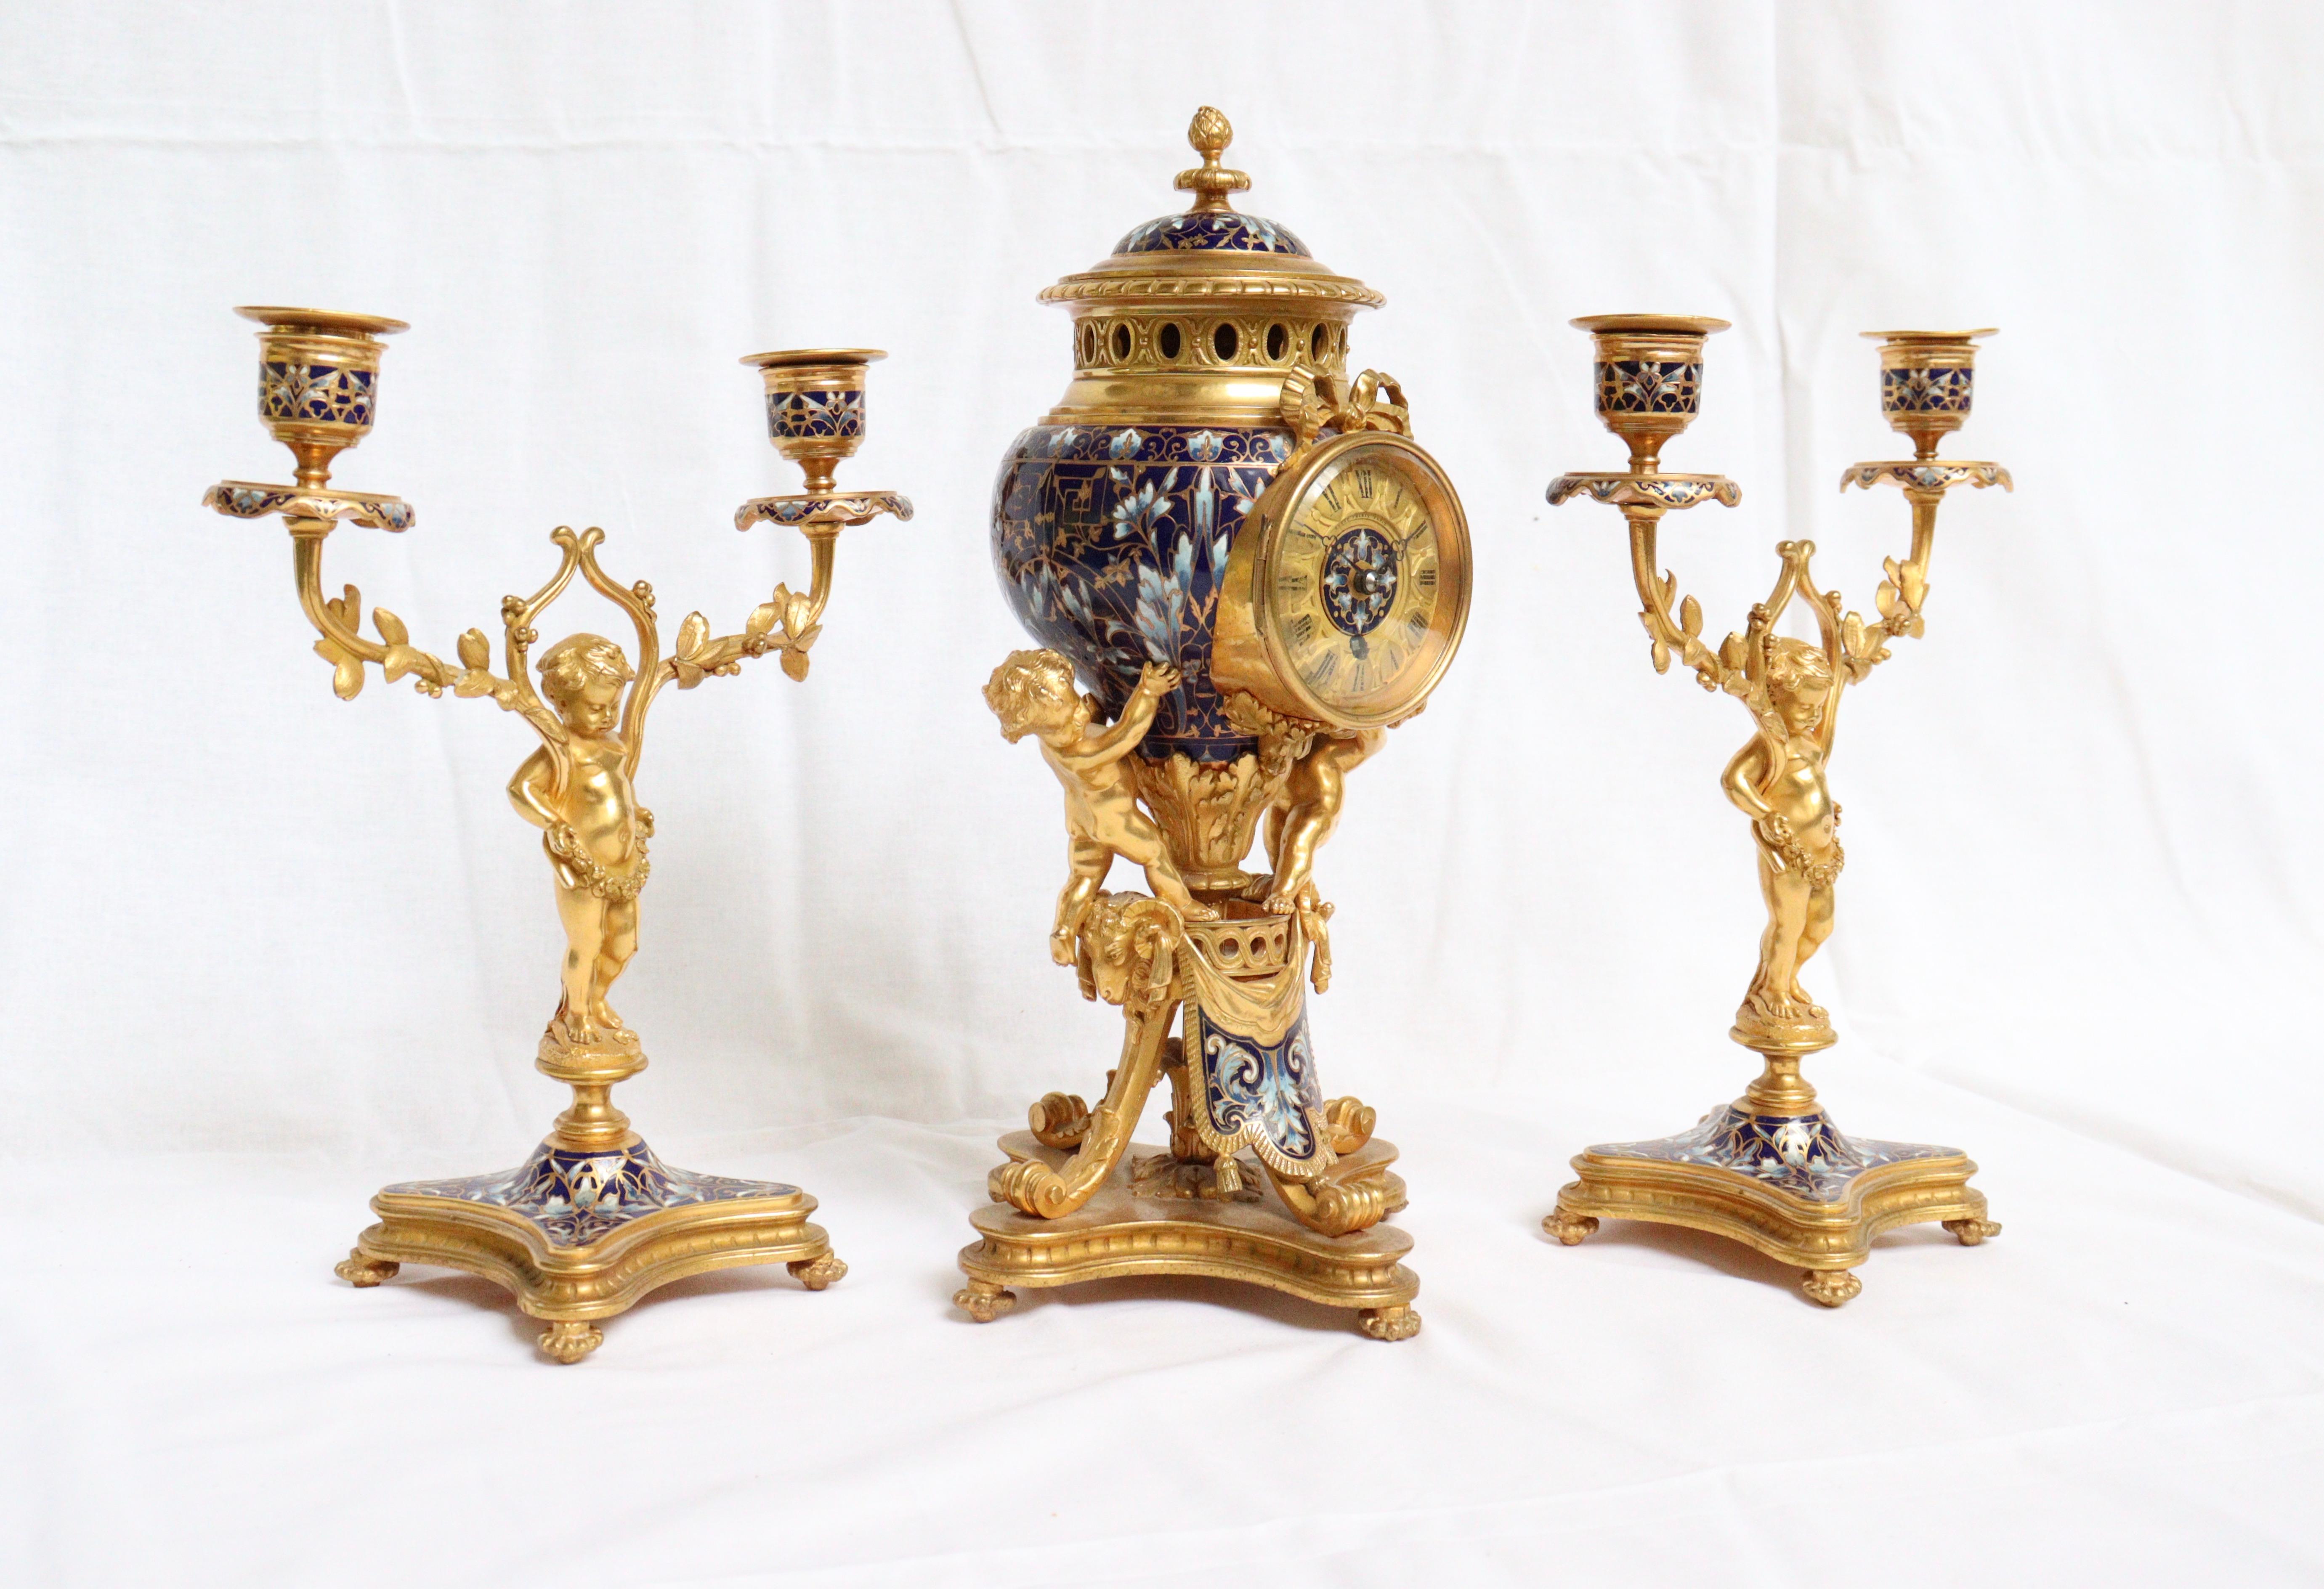 A 19th century French ormolu and cloisonne´ enamel three-piece clock garniture set
This three-piece antique French clock set features delightful gilt bronze models of cherubs, together with some incredibly intricate floral cloisonne´ enamel work,